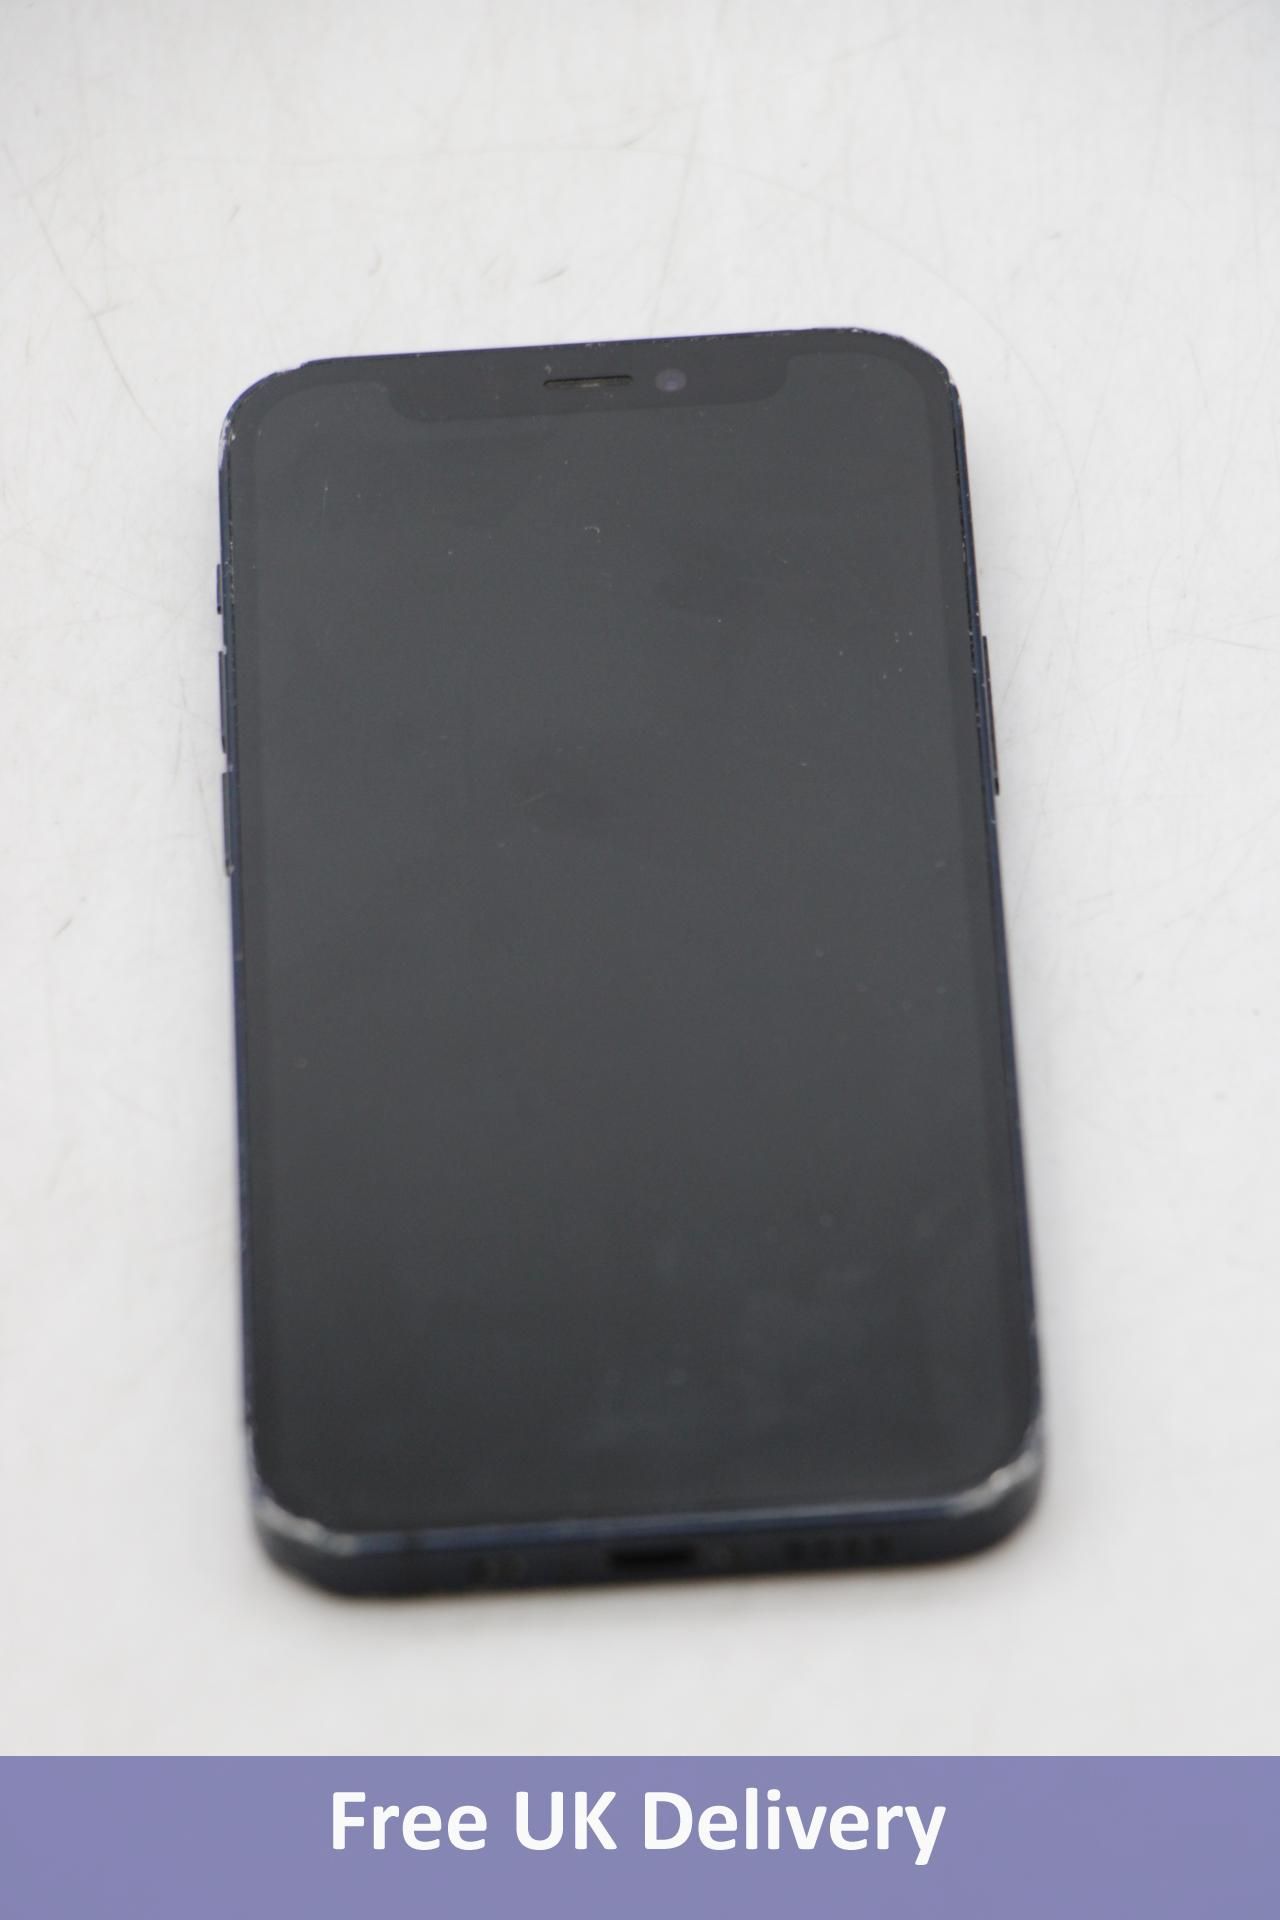 Apple iPhone 12 Mini, 64GB, Black. Used, scratches and dents to casing, no box or accessories. Check